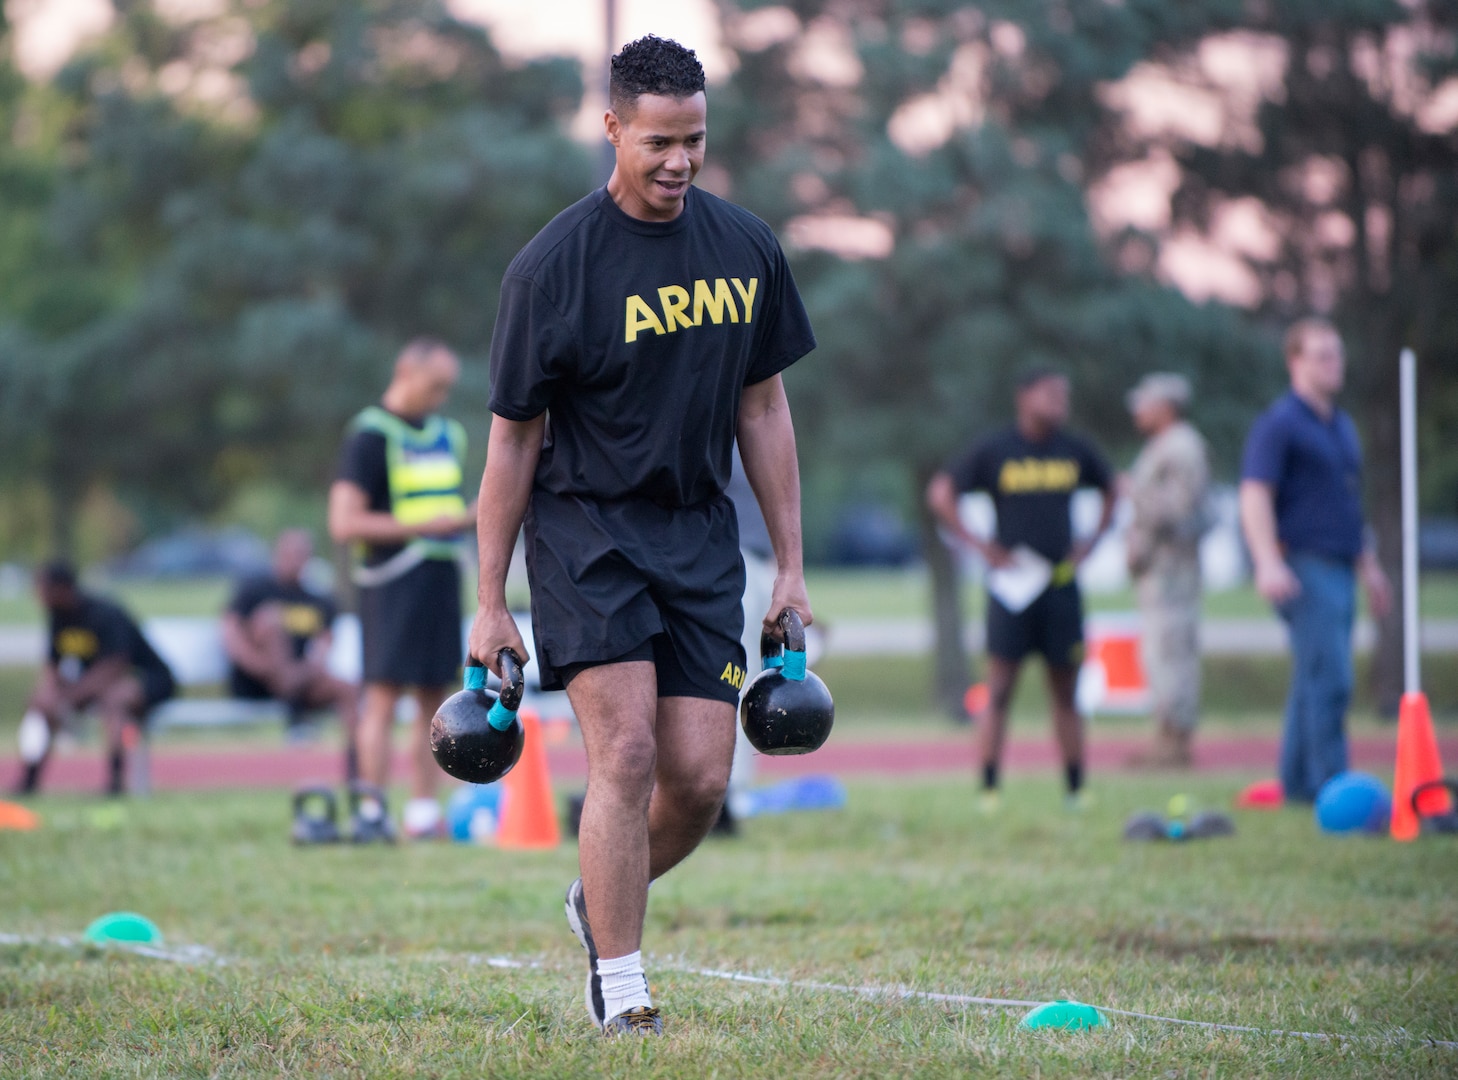 A Soldier carries two 40-pound kettlebell weights during a pilot for the Army Combat Fitness Test, a six-event assessment designed to reduce injuries and replace the current Army Physical Fitness Test.